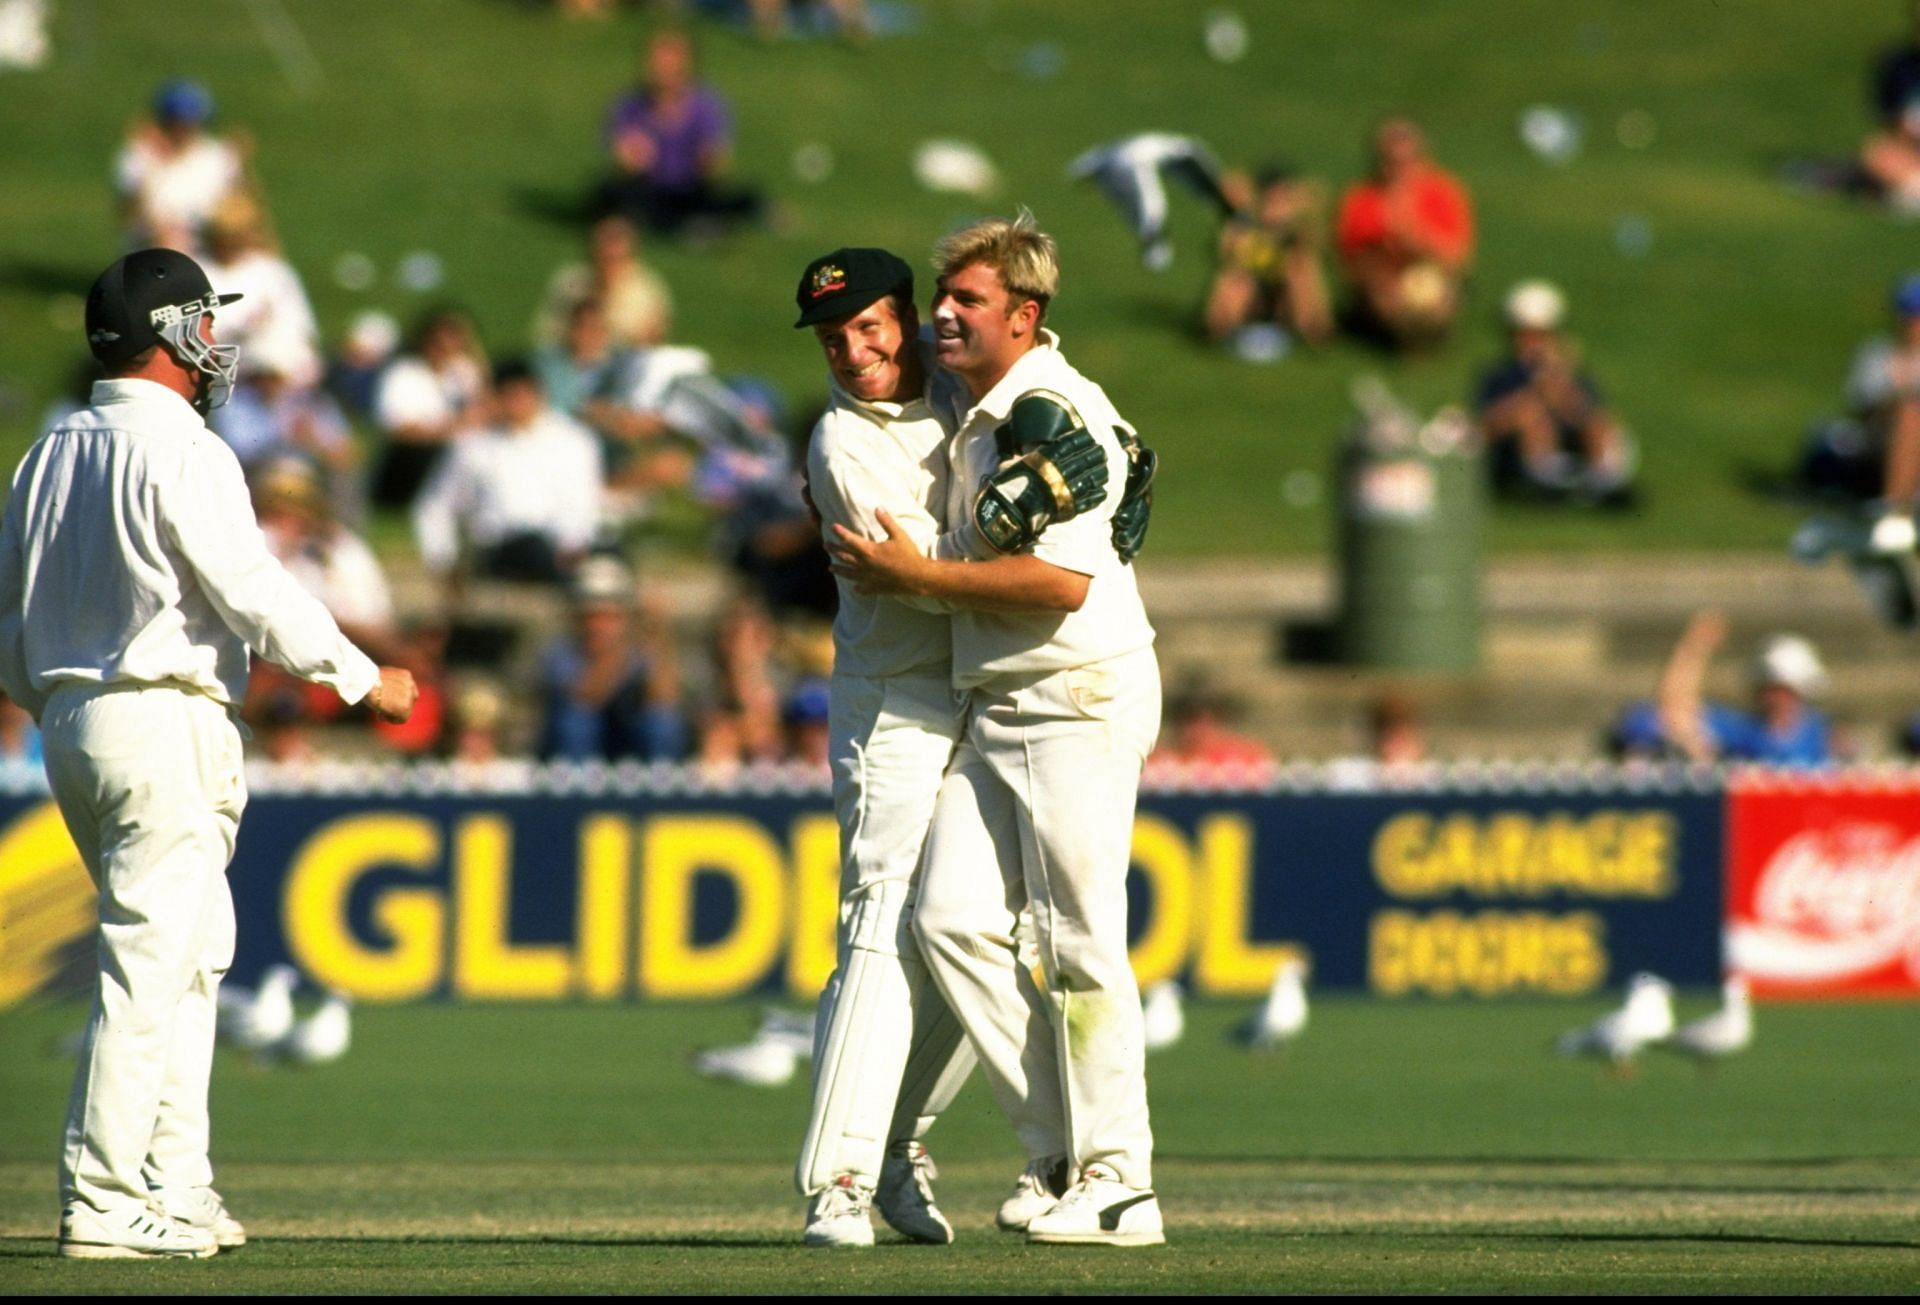 Ian Healy congratulates Shane Warne on his 100th Test wicket during a Test against South Africa at the Adelaide Oval. Pic: Getty Images